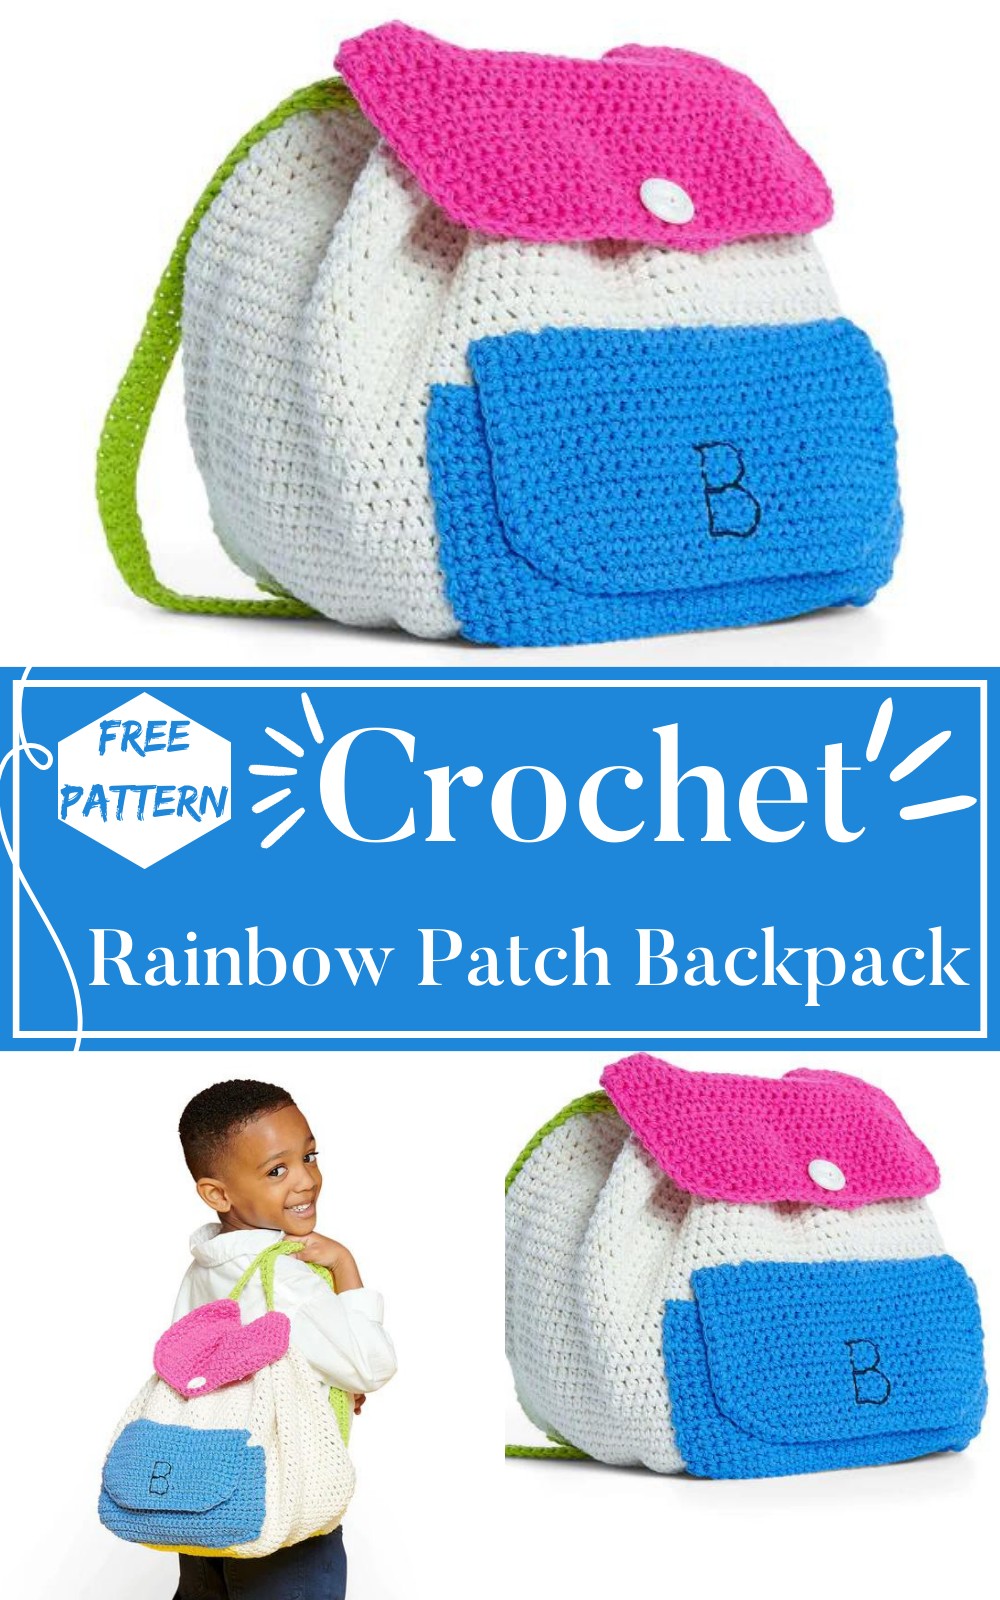 Crochet Rainbow Patch Backpack